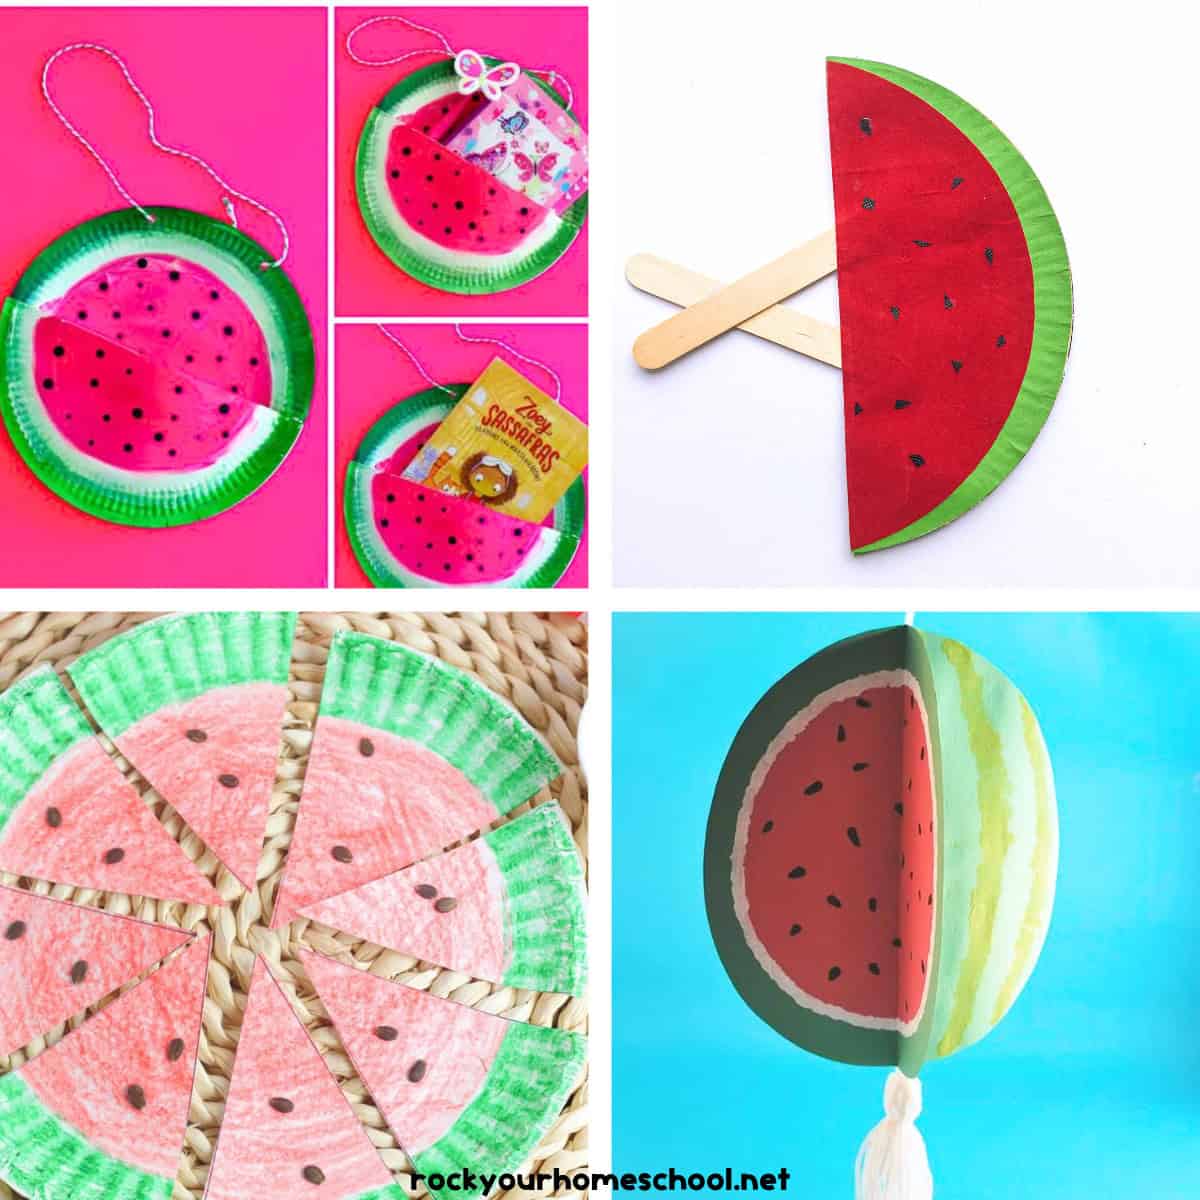 Watermelon Crafts For Kids: 15 Ways To Have Sweet Fun